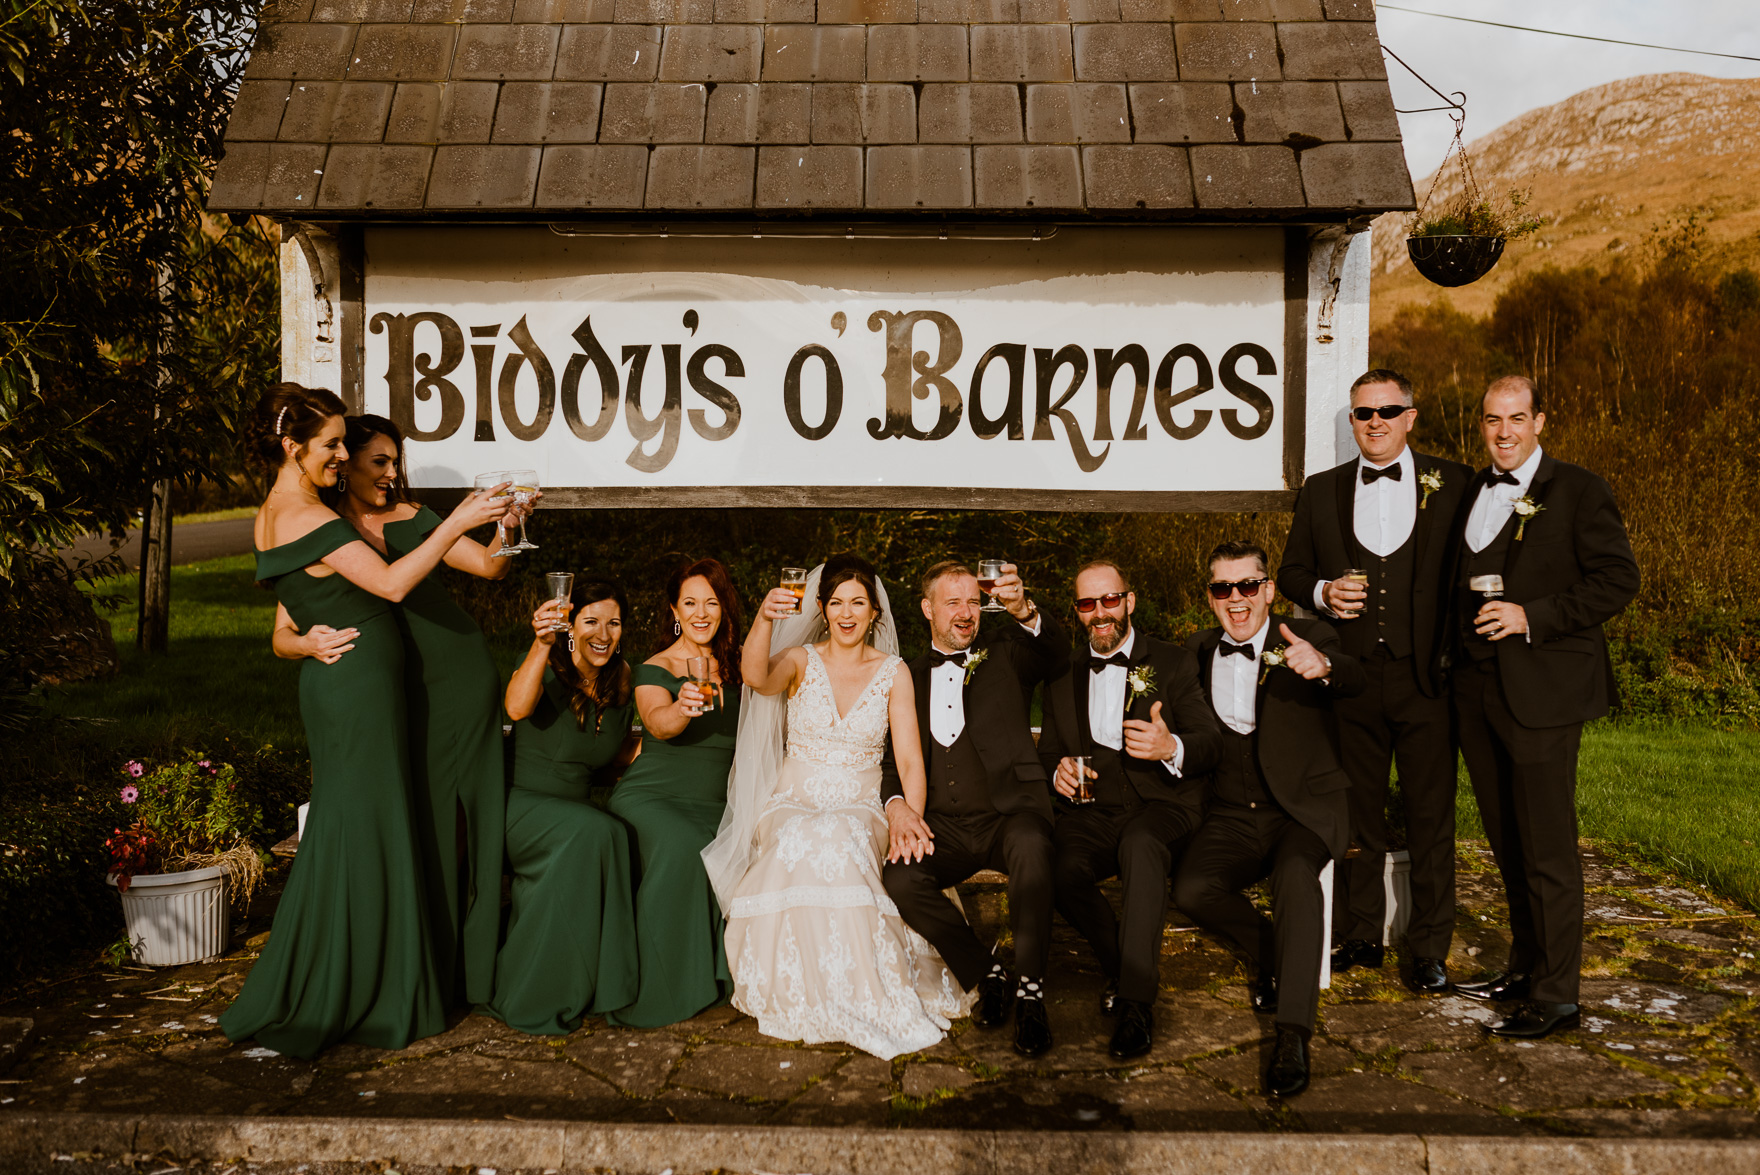 A group of people bridal party posing for a picture